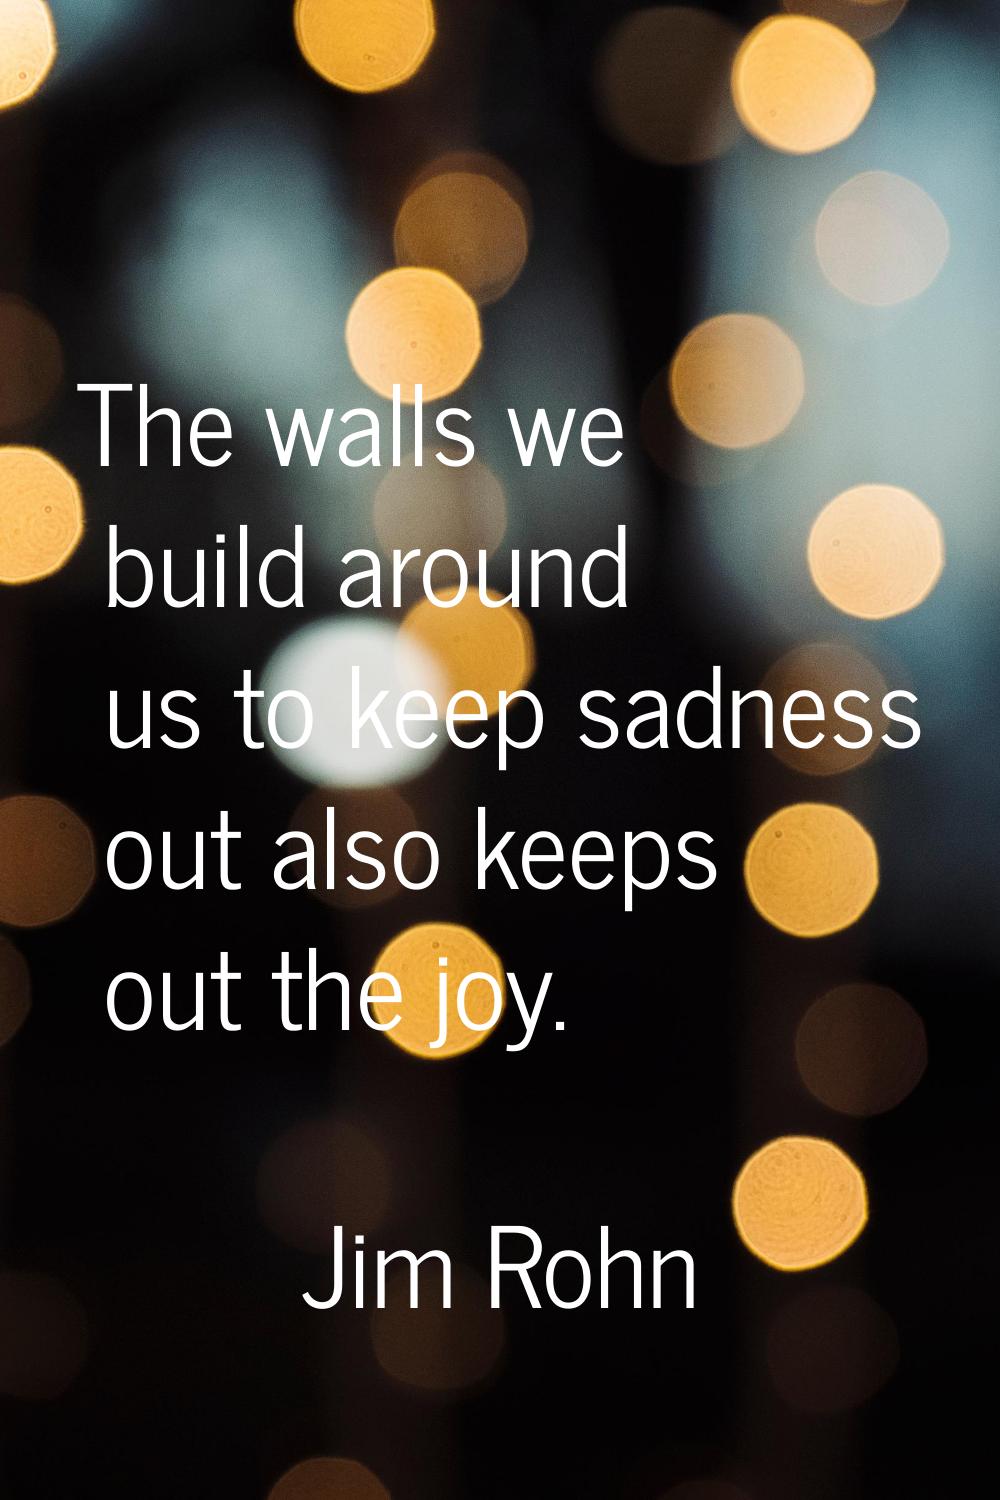 The walls we build around us to keep sadness out also keeps out the joy.